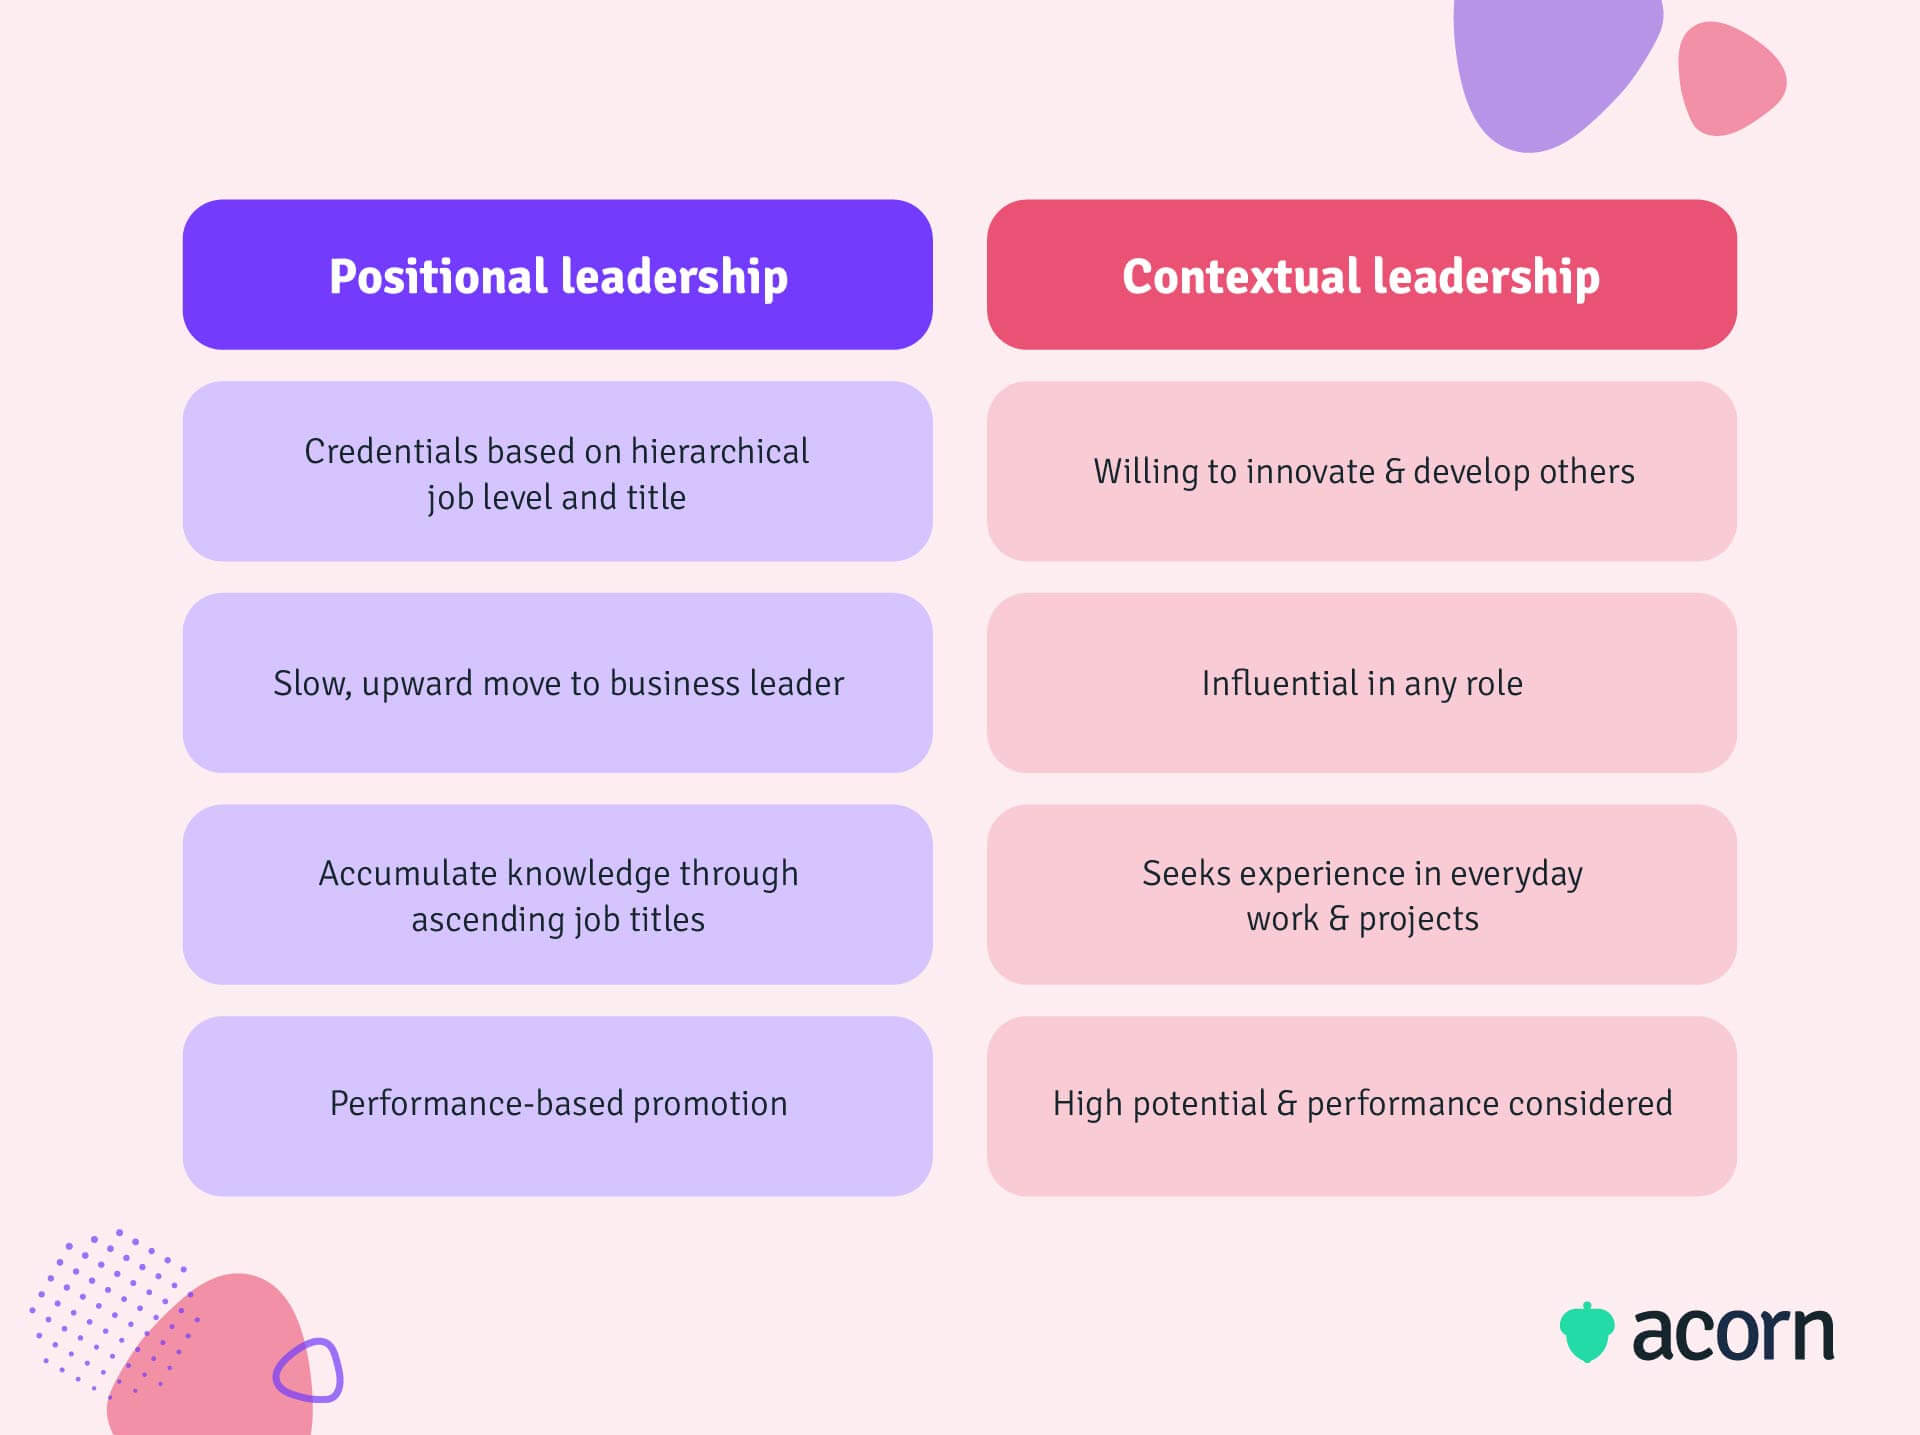 Table comparing traditional positional leadership with emerging contextual leadership